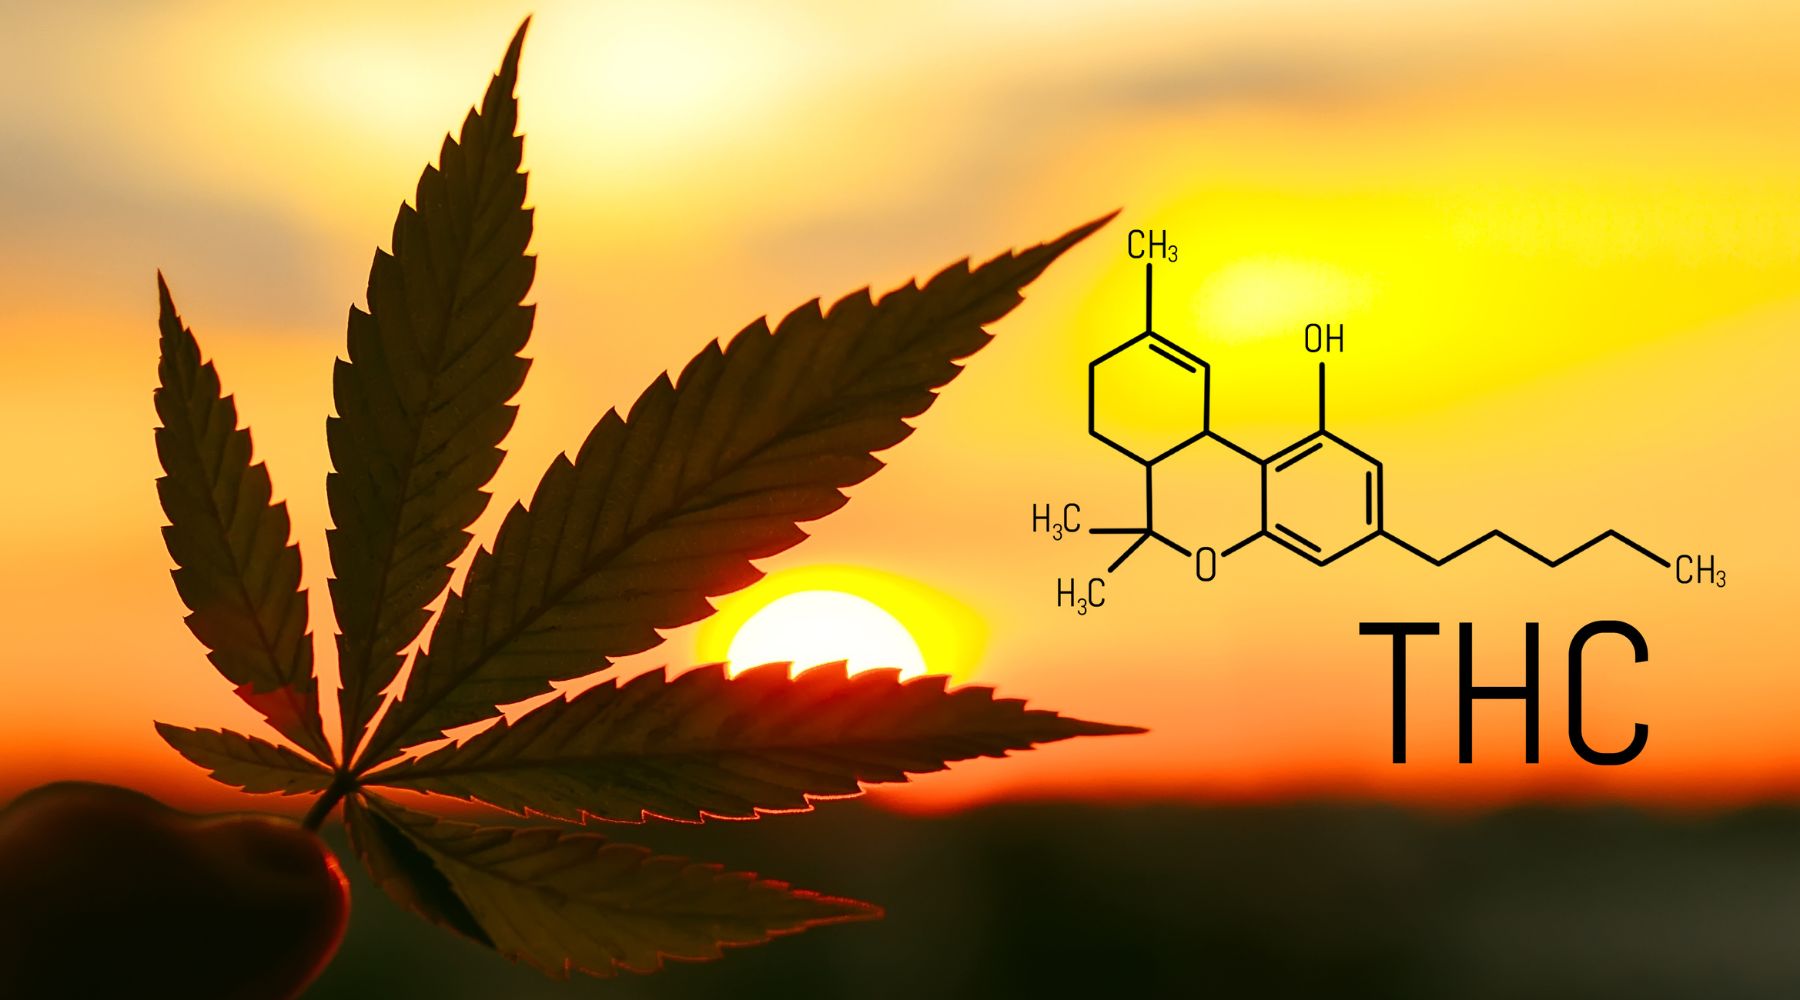 An image of a hemp leaf at sunset with the chemical symbol for THC